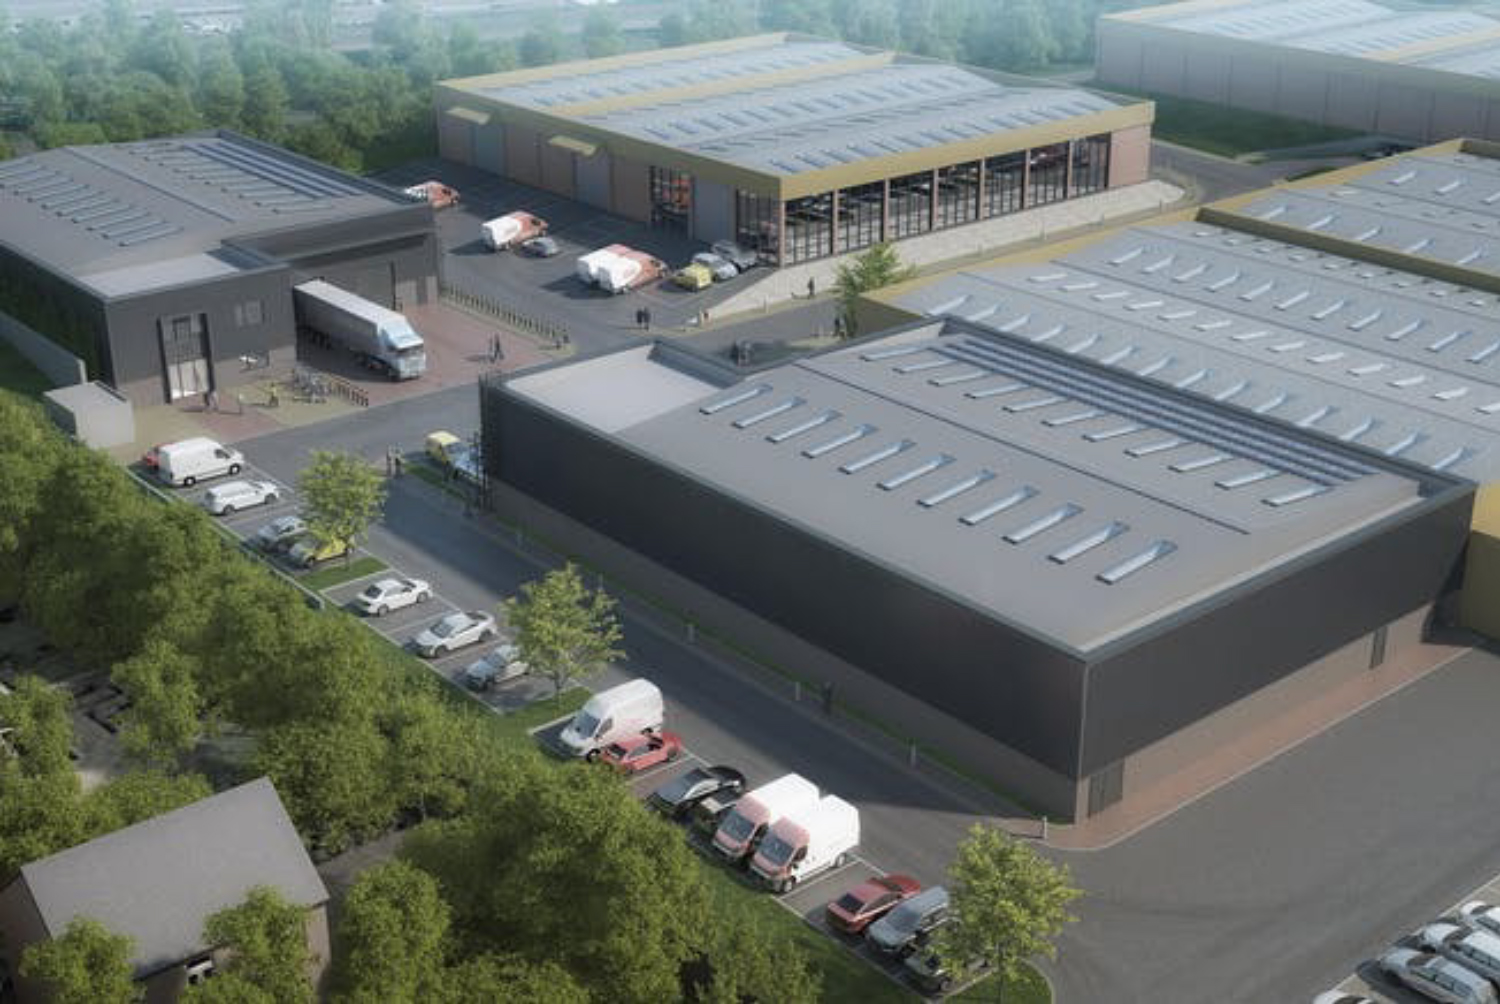 News: Powell Williams Project Management begins work with Wren Construction on new build ‘A’ rated, ‘Very Good’ industrial units.